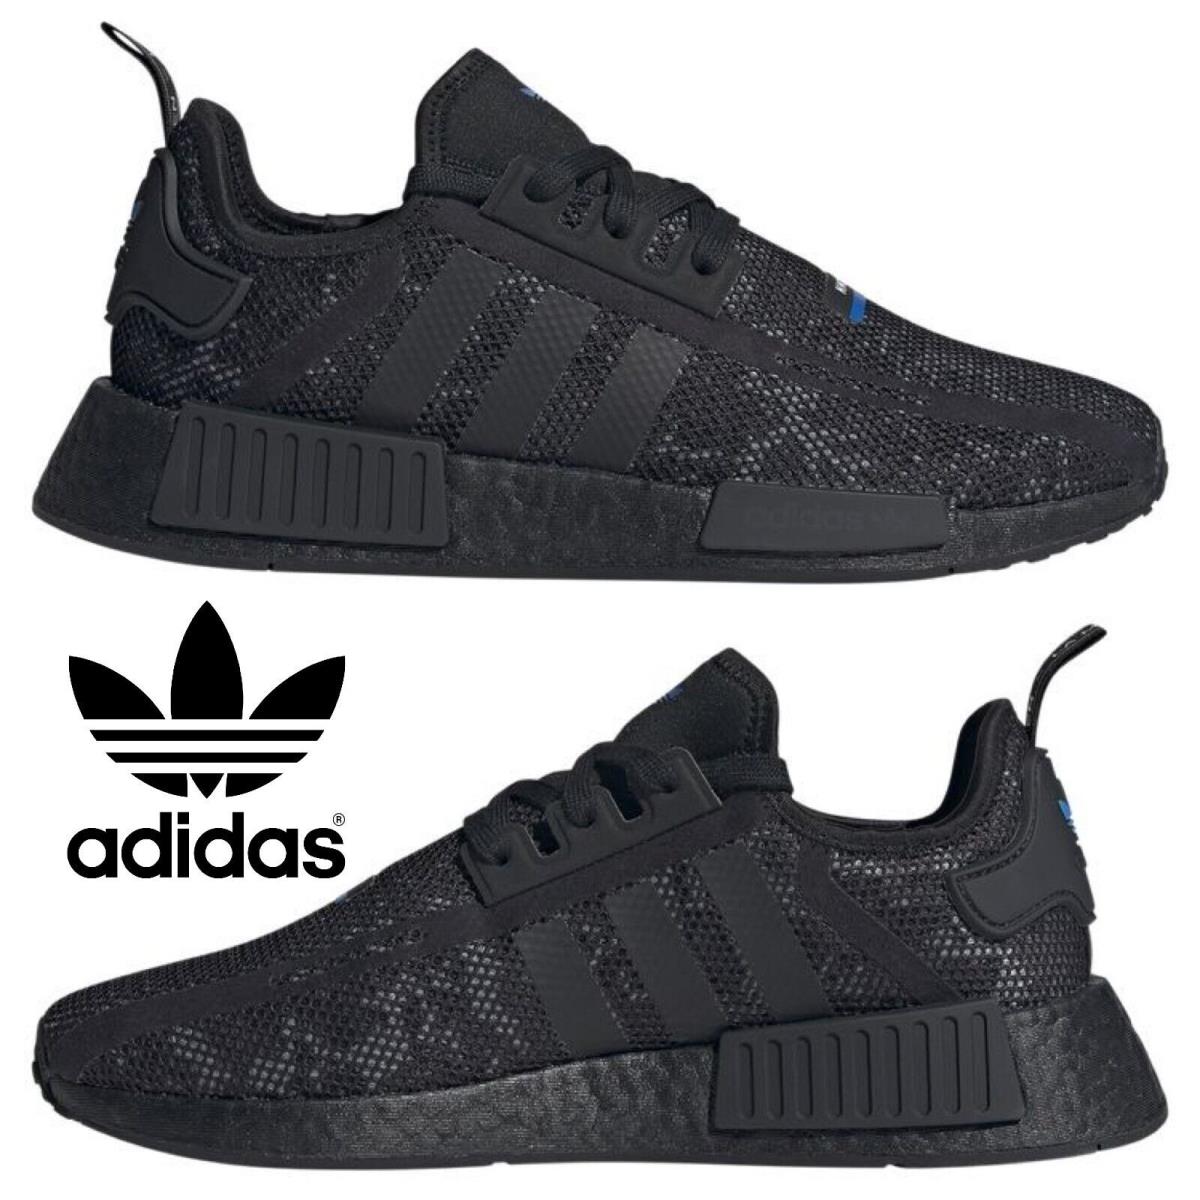 Adidas Originals Nmd R1 Men`s Sneakers Running Shoes Gym Casual Sport Core Black